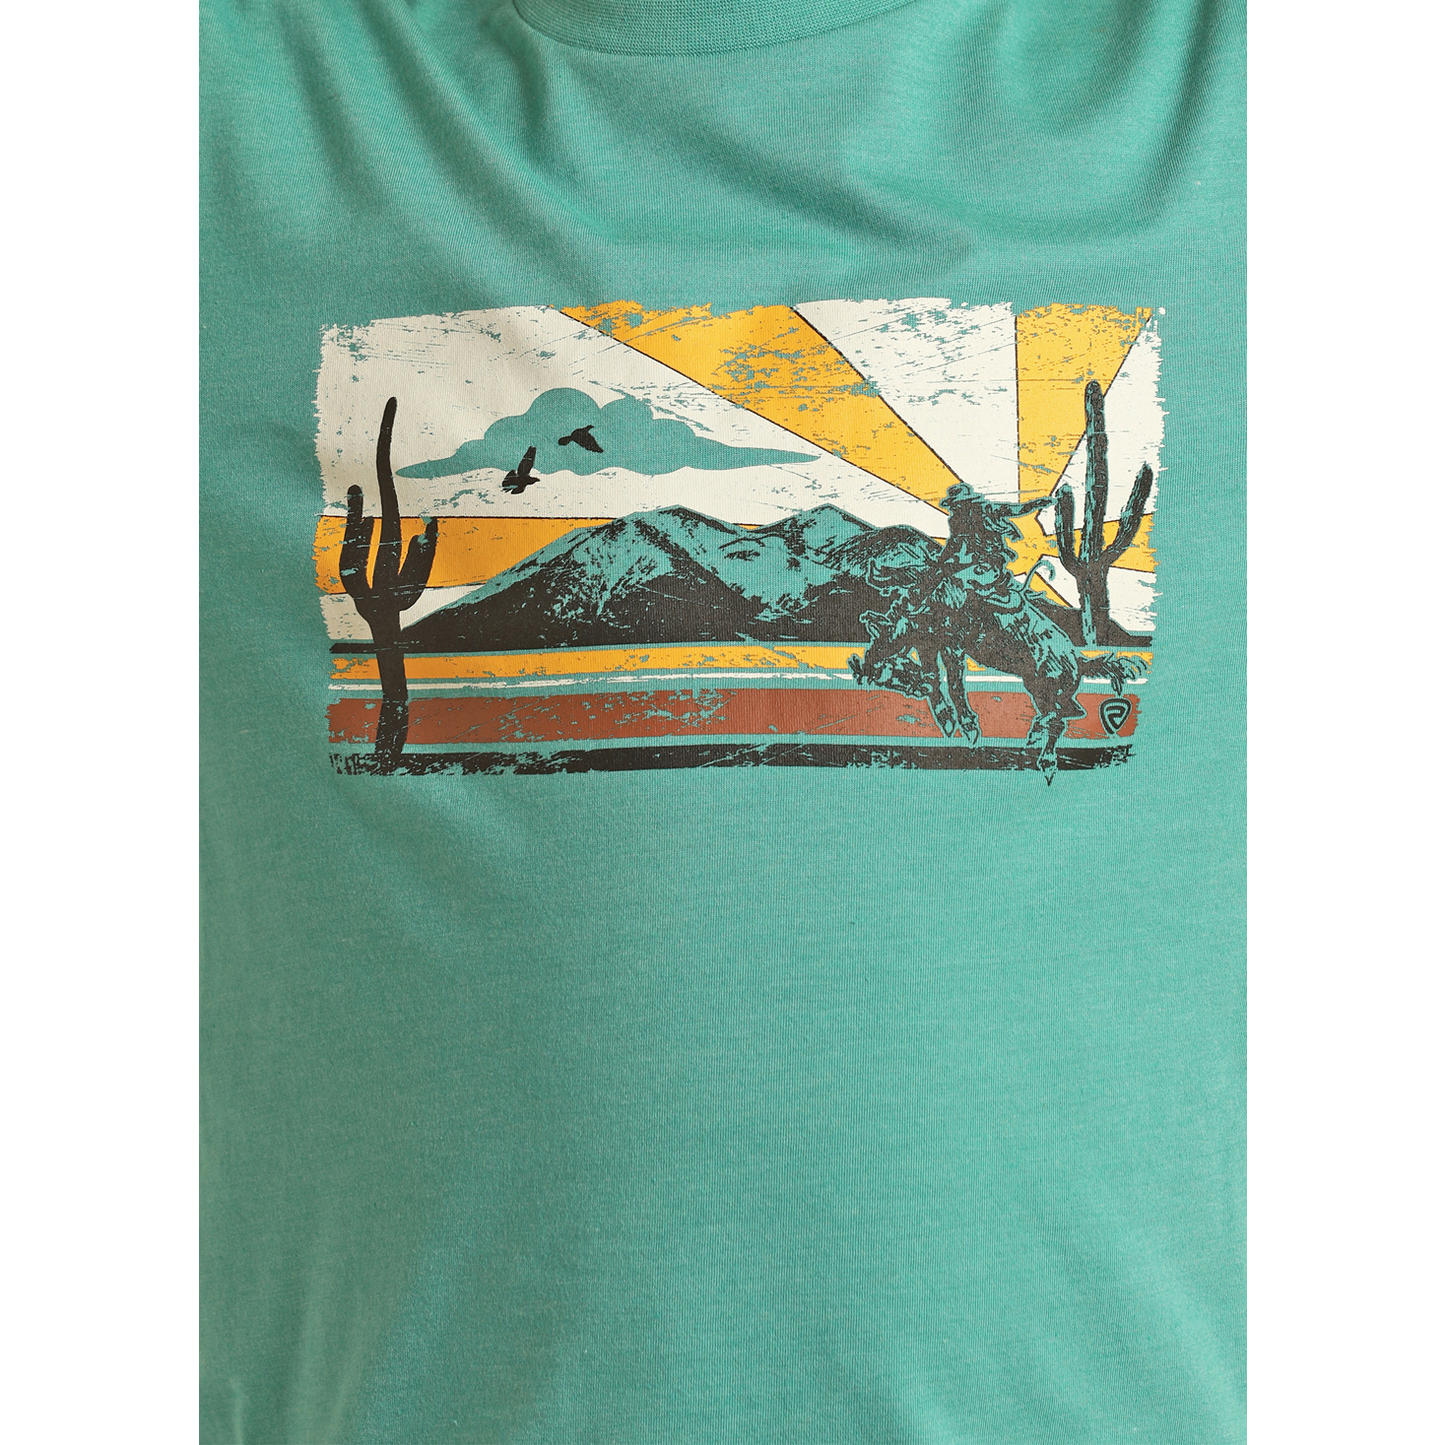 Rock & Roll® Youth Boy's Turquoise Desert Print T-Shirt RRBT21R064-86